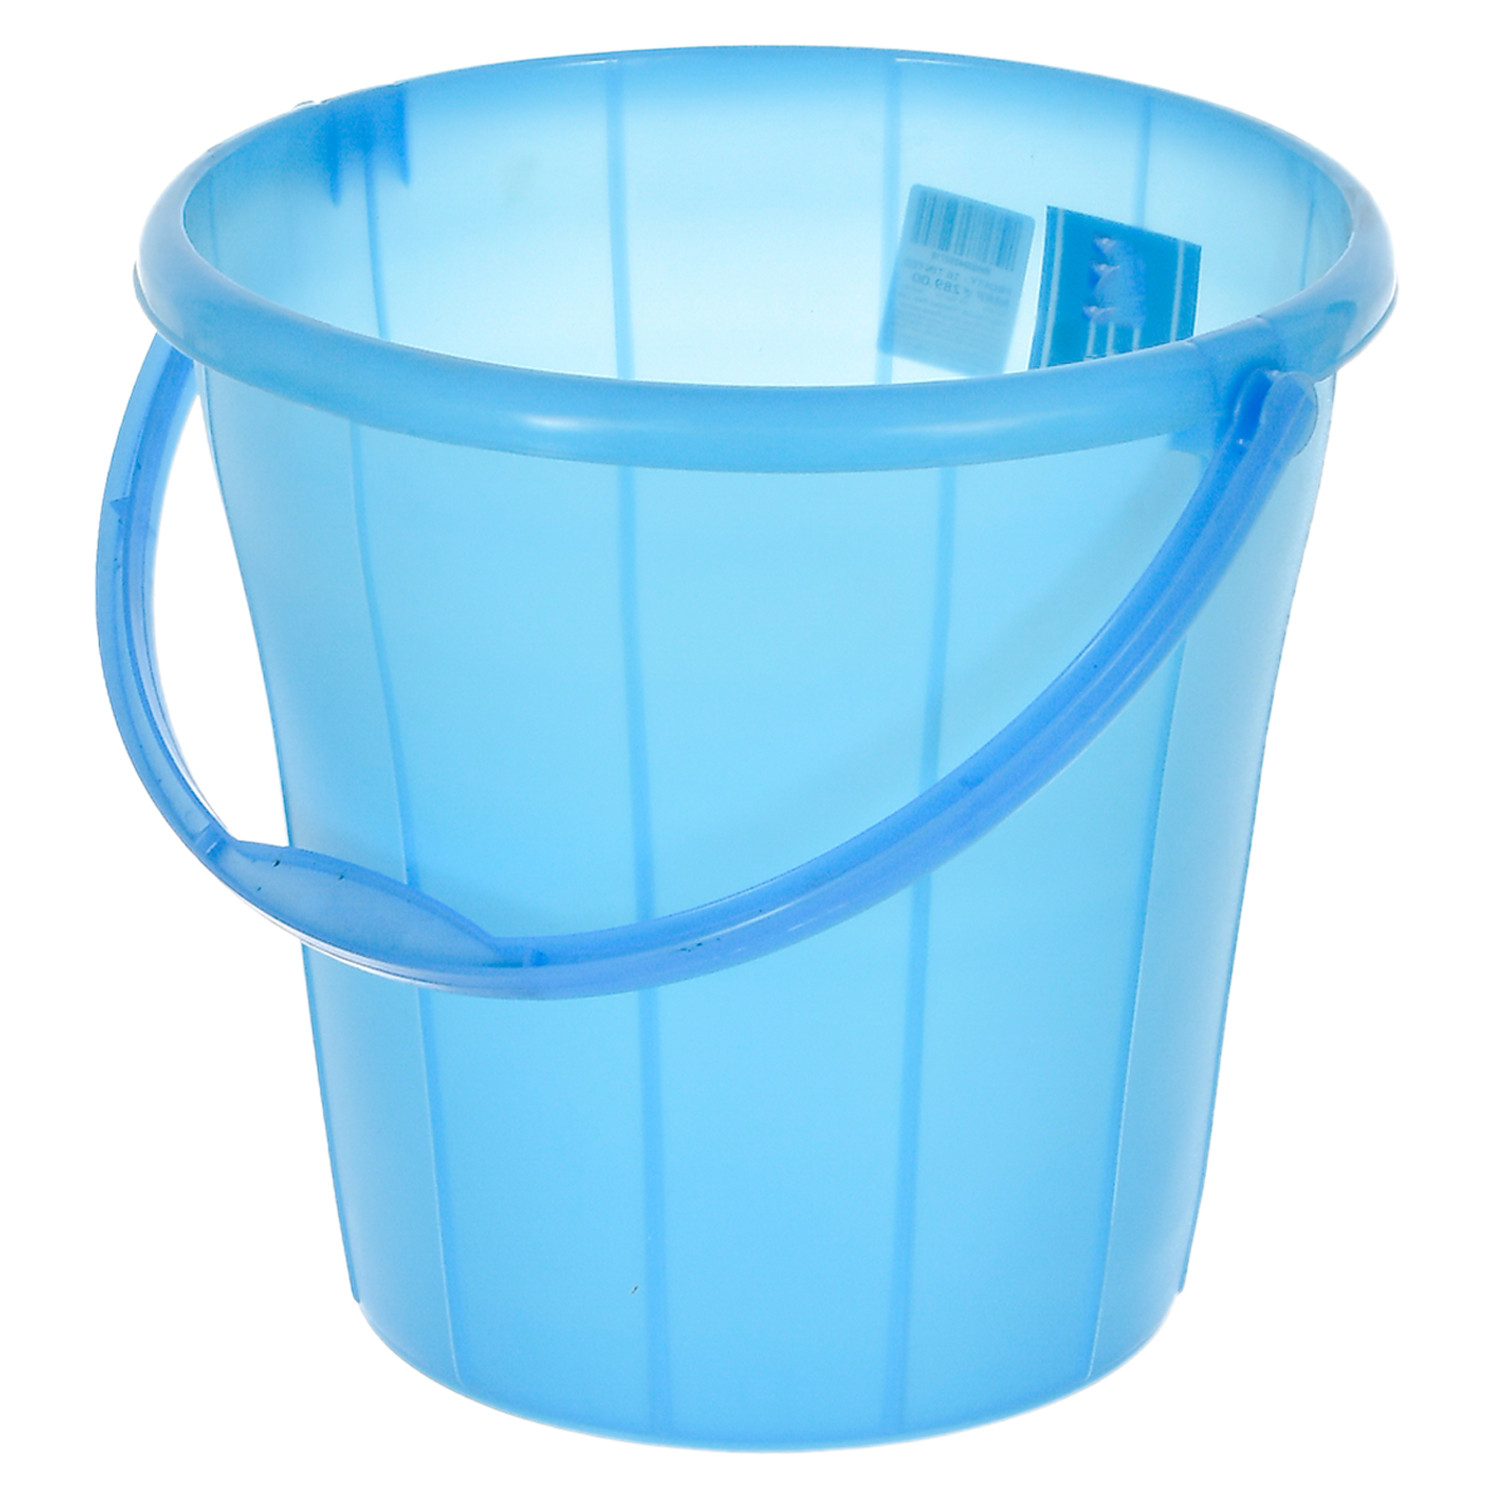 Kuber Industries Multiuses Plastic Bucket With Handle & Measuring Scale, 16 litre- Pack of 2 (Blue & Black)-46KM0331